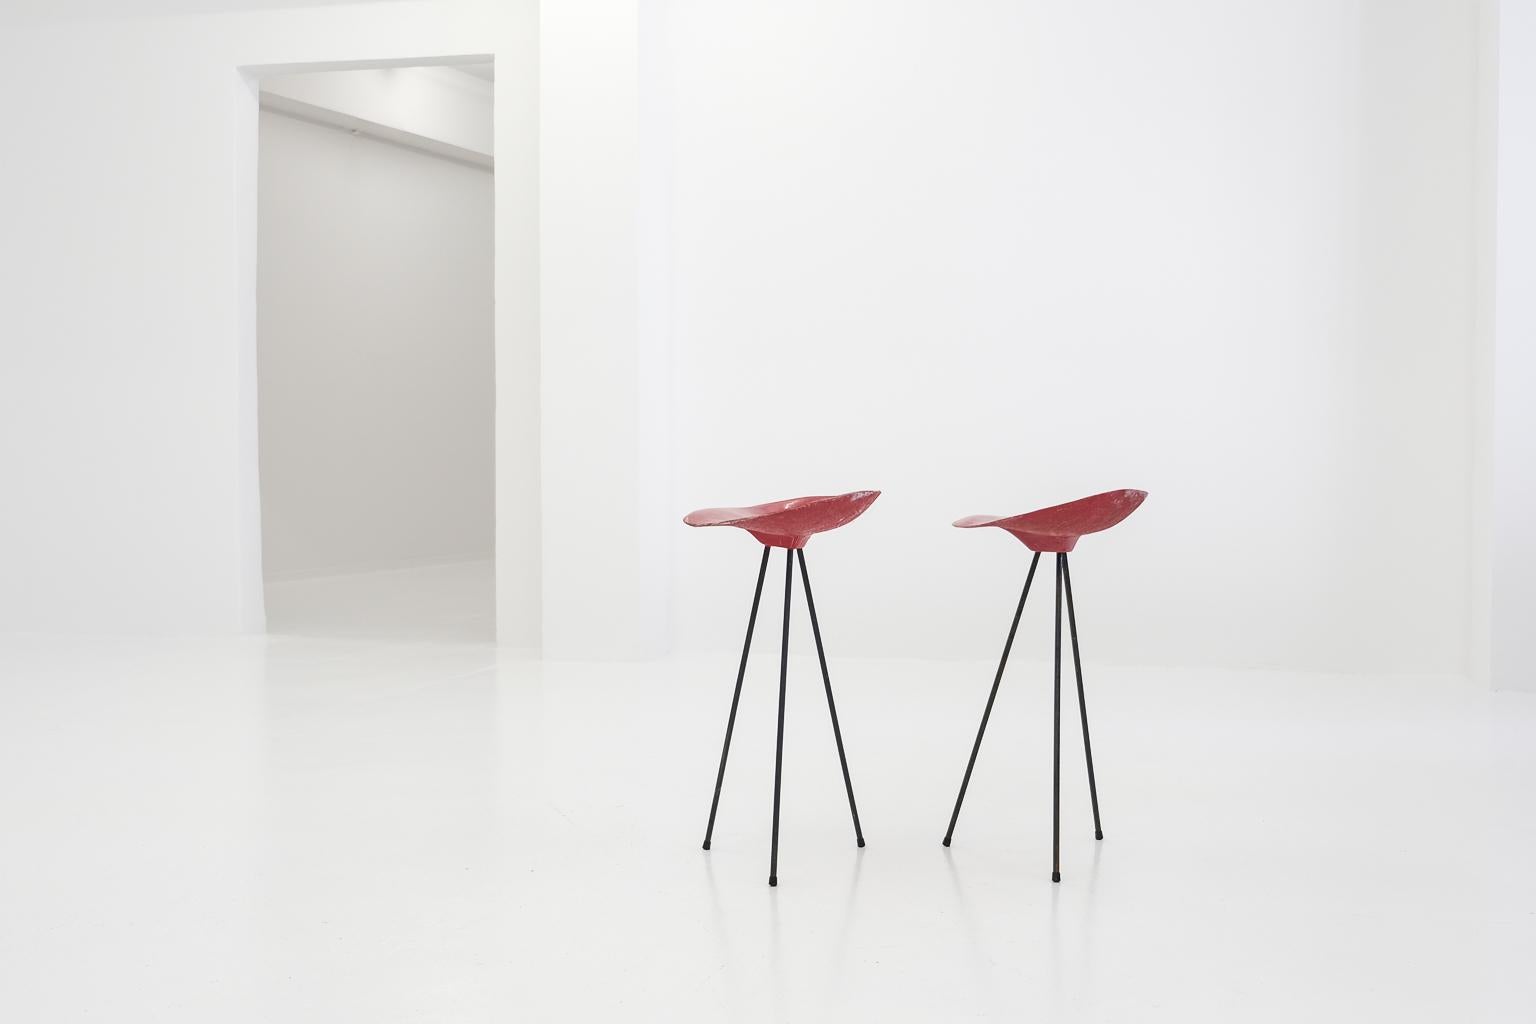 French A Pair of tripod stool by Jean Raymond Picard/Jean-René Picard for S.E.T.A. For Sale